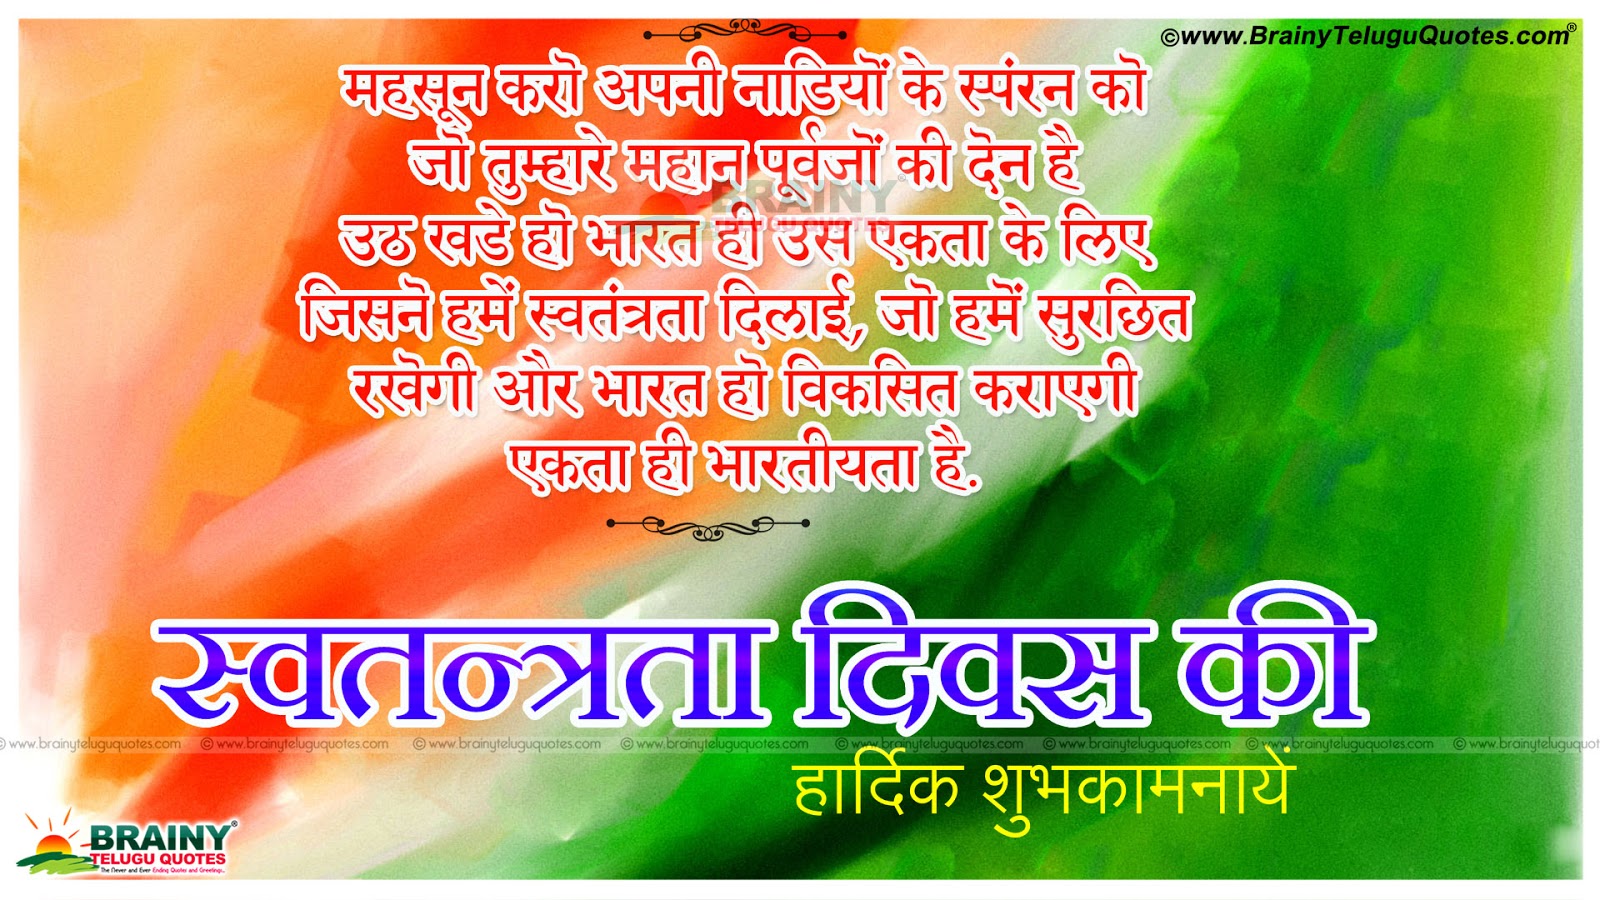 Happy 70th Independence Day Quotes Greetings Wishes Images